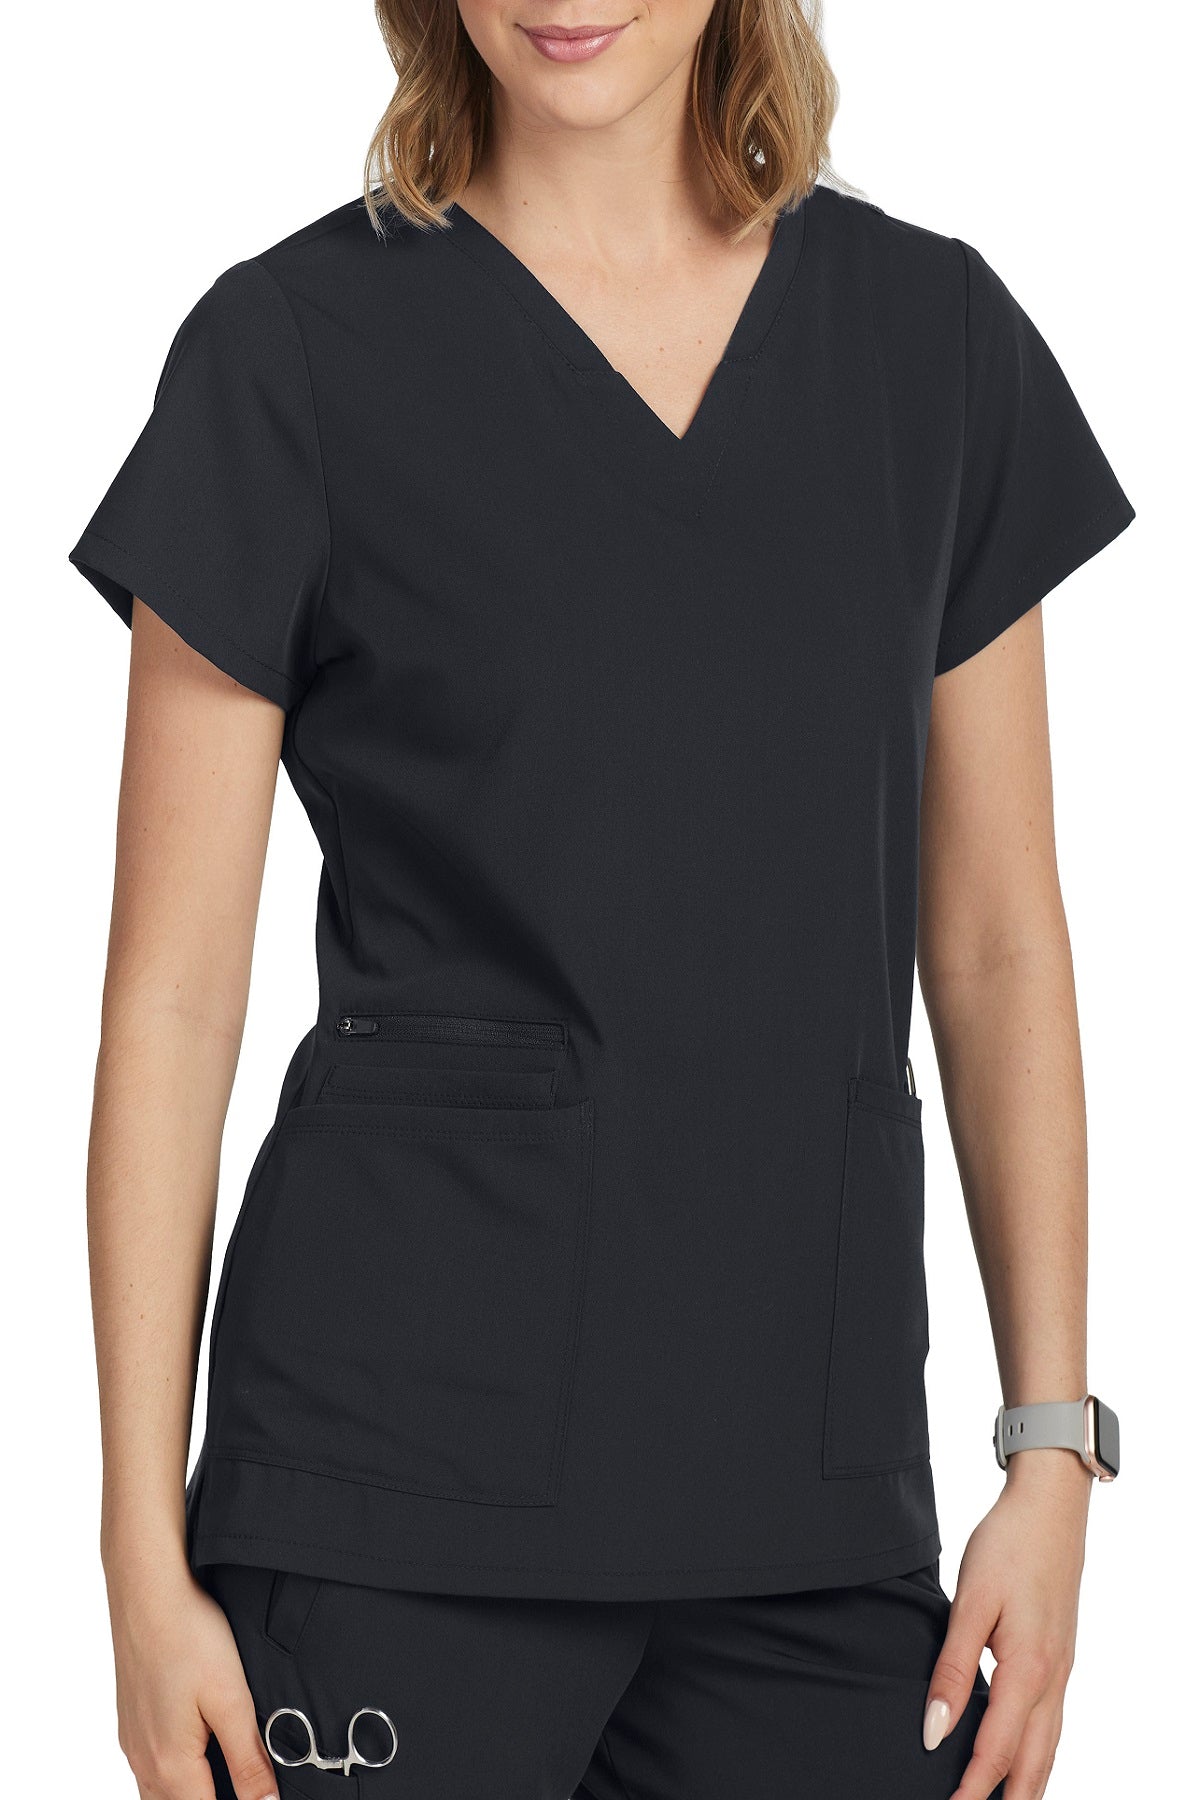 Barco Unify Scrub Top Purpose V-Neck in Steel at Parker's Clothing and Shoes.